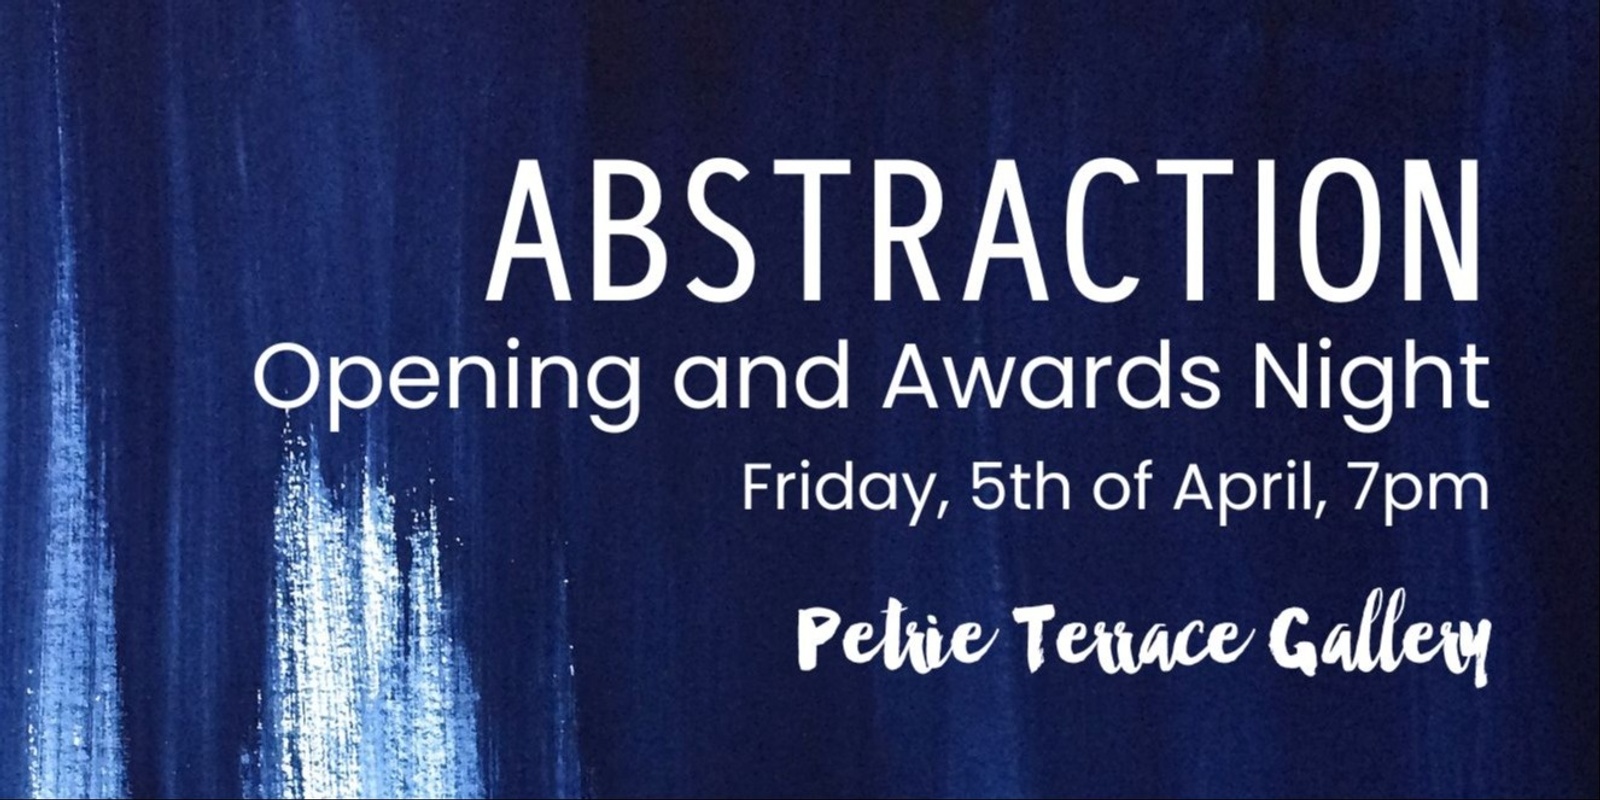 Banner image for Abstraction Opening and Awards Night